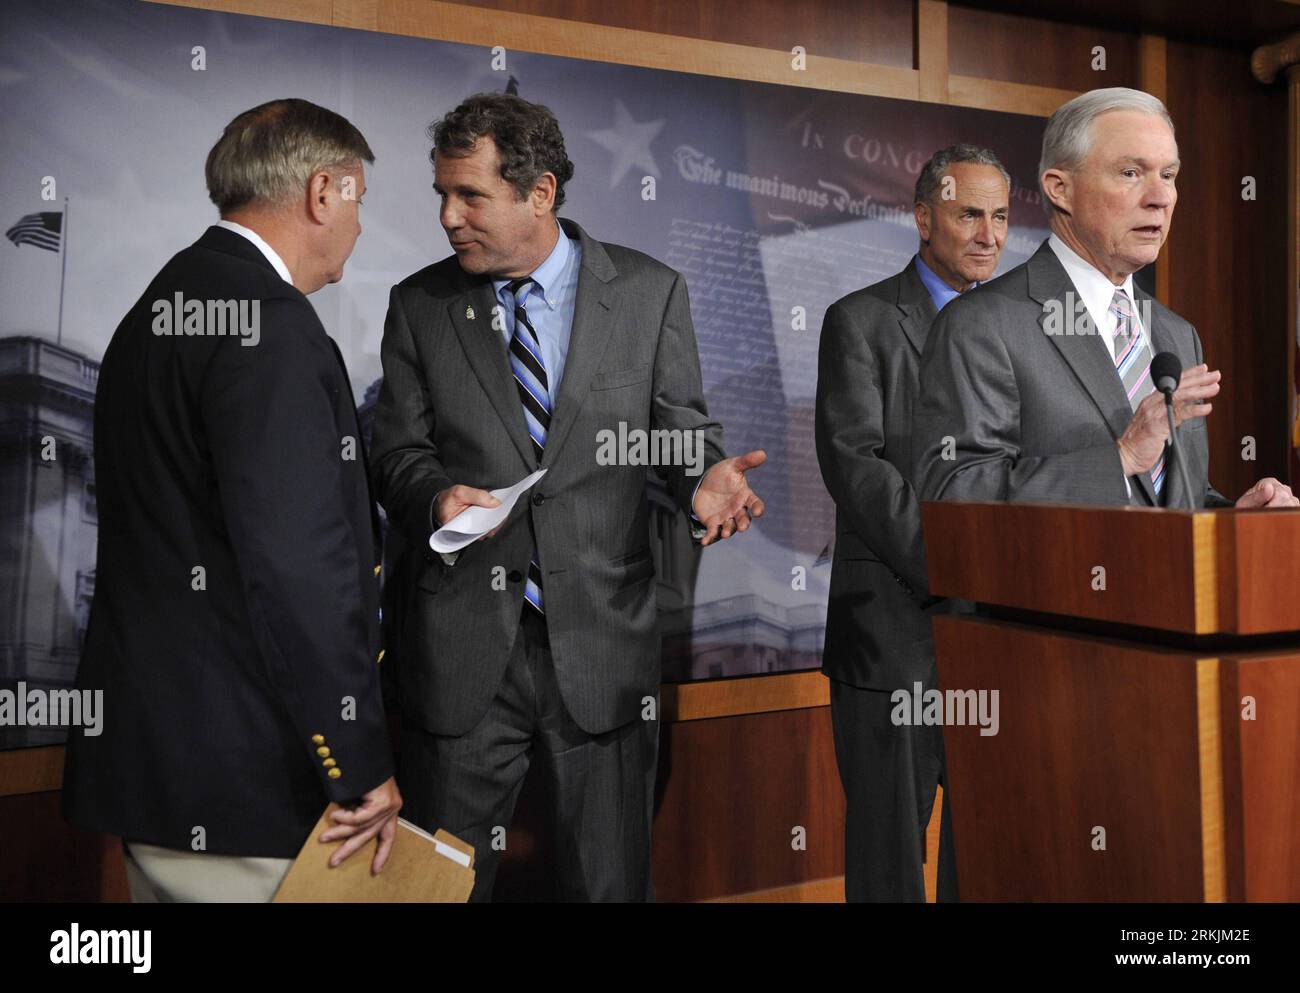 Bildnummer: 56143857  Datum: 03.10.2011  Copyright: imago/Xinhua (111004) -- WASHINGTON, Oct. 4, 2011 (Xinhua) -- (L-R) U.S. Senators Lindsey Graham, Sherrod Brown, Chuck Schumer and Jeff Sessions attend a press conference in Washington D.C., on Oct. 3, 2011. The U.S. Senate voted Monday to allow a debate on a controversial bill on so-called currency manipulation by China amid strong opposition from China and U.S. business groups. (Xinhua/Zhang Jun) (nxl) US-WASHINGTON-SENATE-EXCHANGE RATE-PRESS CONFERENCE PUBLICATIONxNOTxINxCHN People Politik xjh x0x premiumd 2011 quer      56143857 Date 03 1 Stock Photo